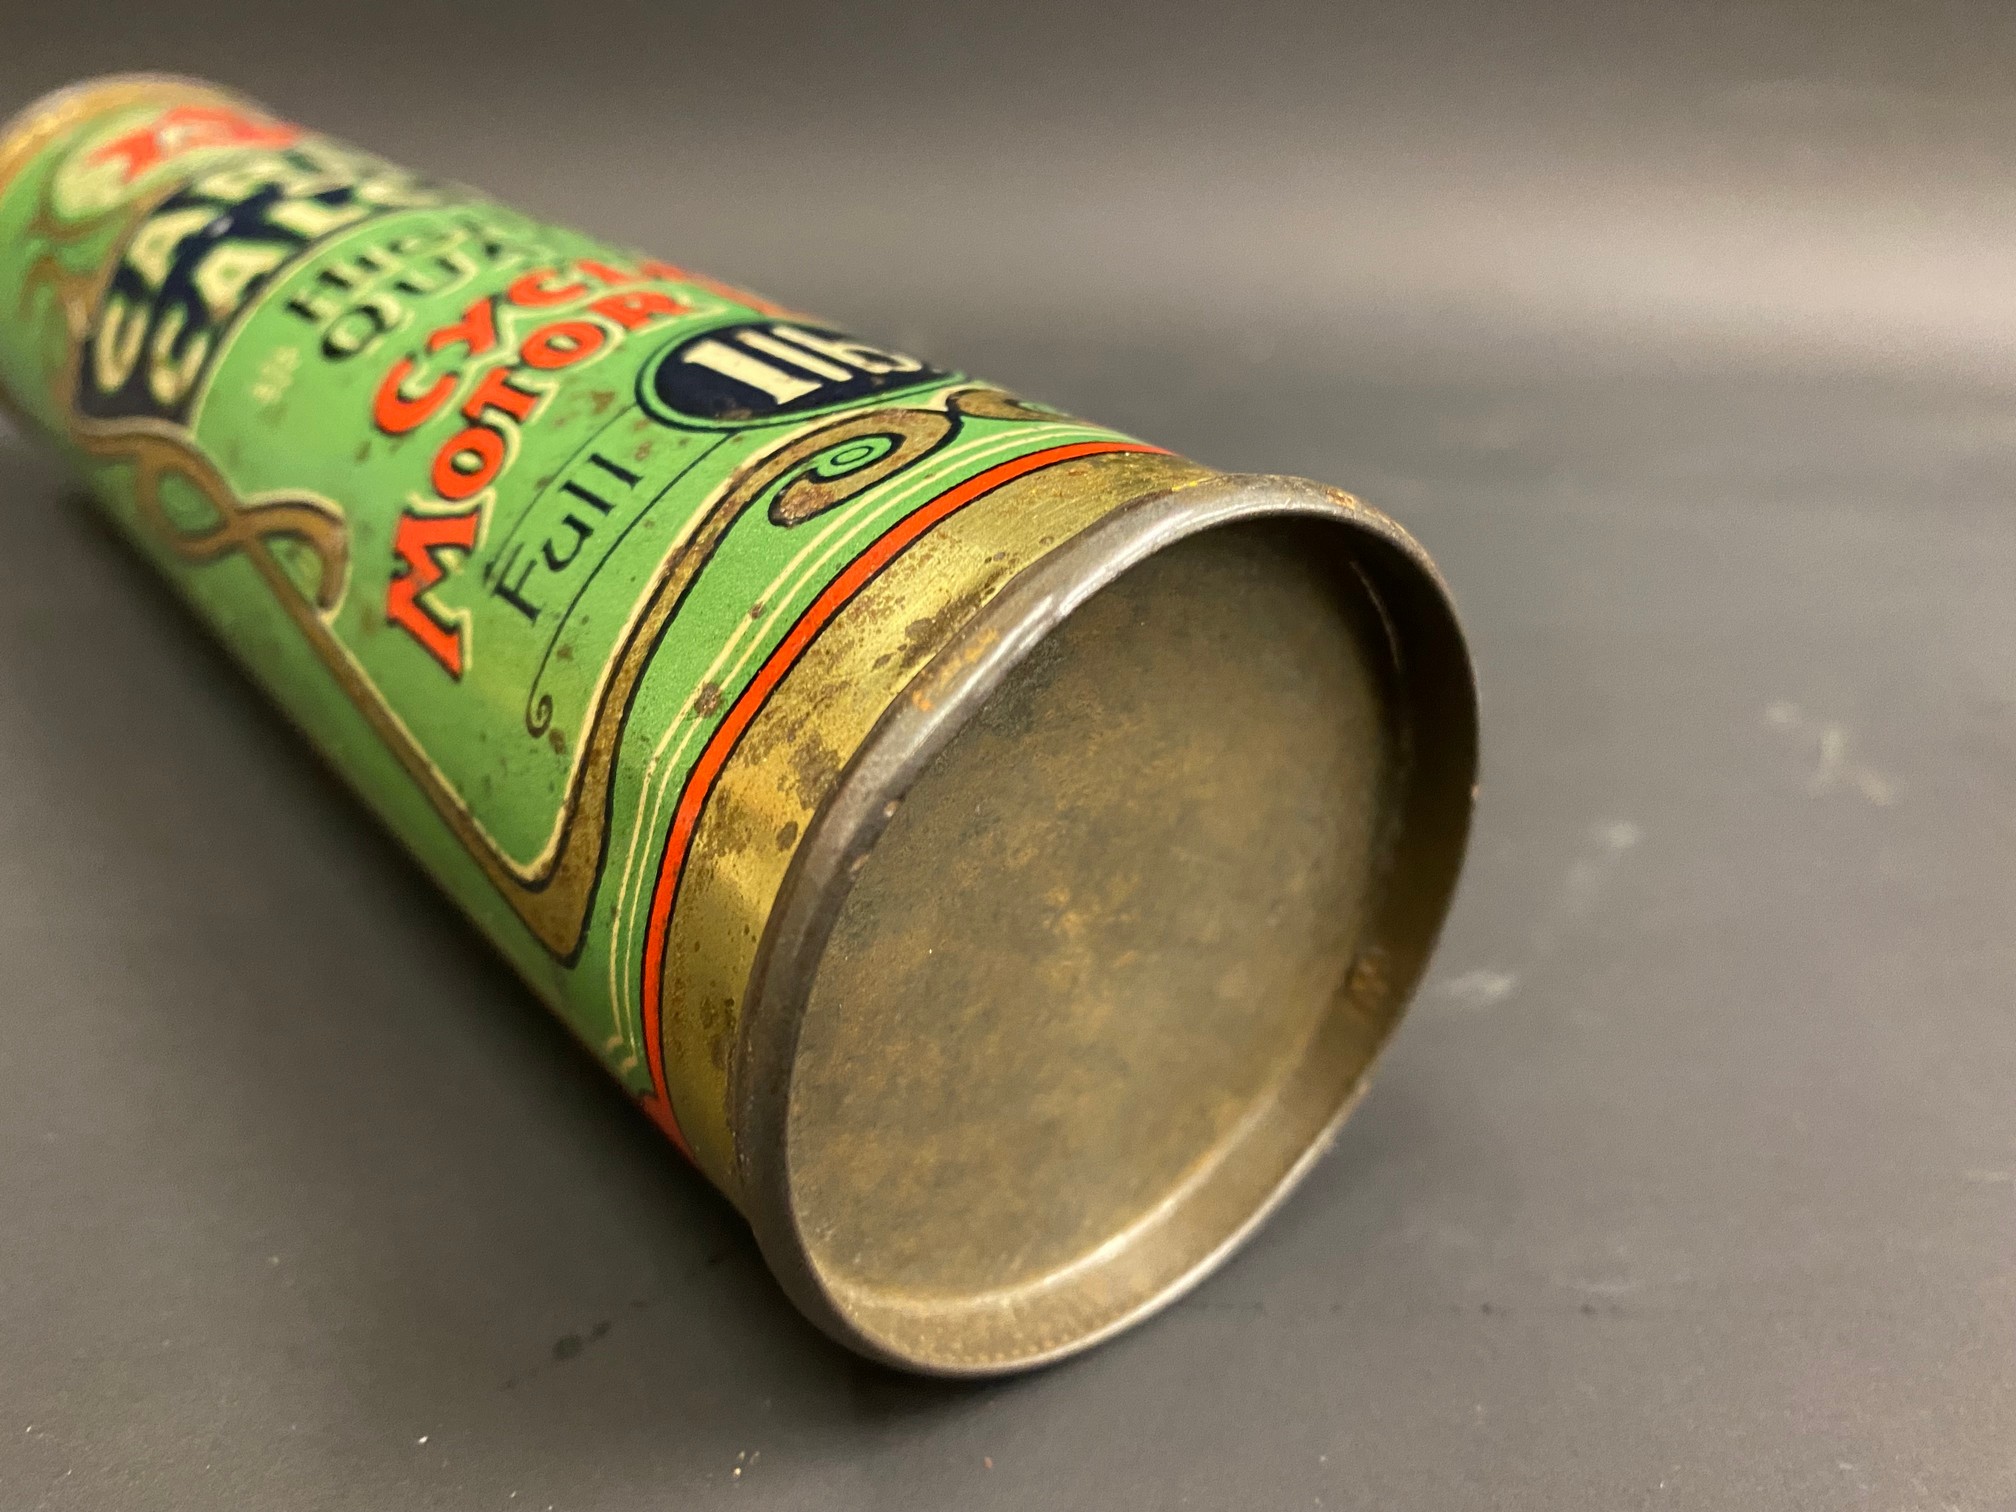 A Carbide of Calcium 1lb cylindrical tin in good condition. - Image 6 of 6